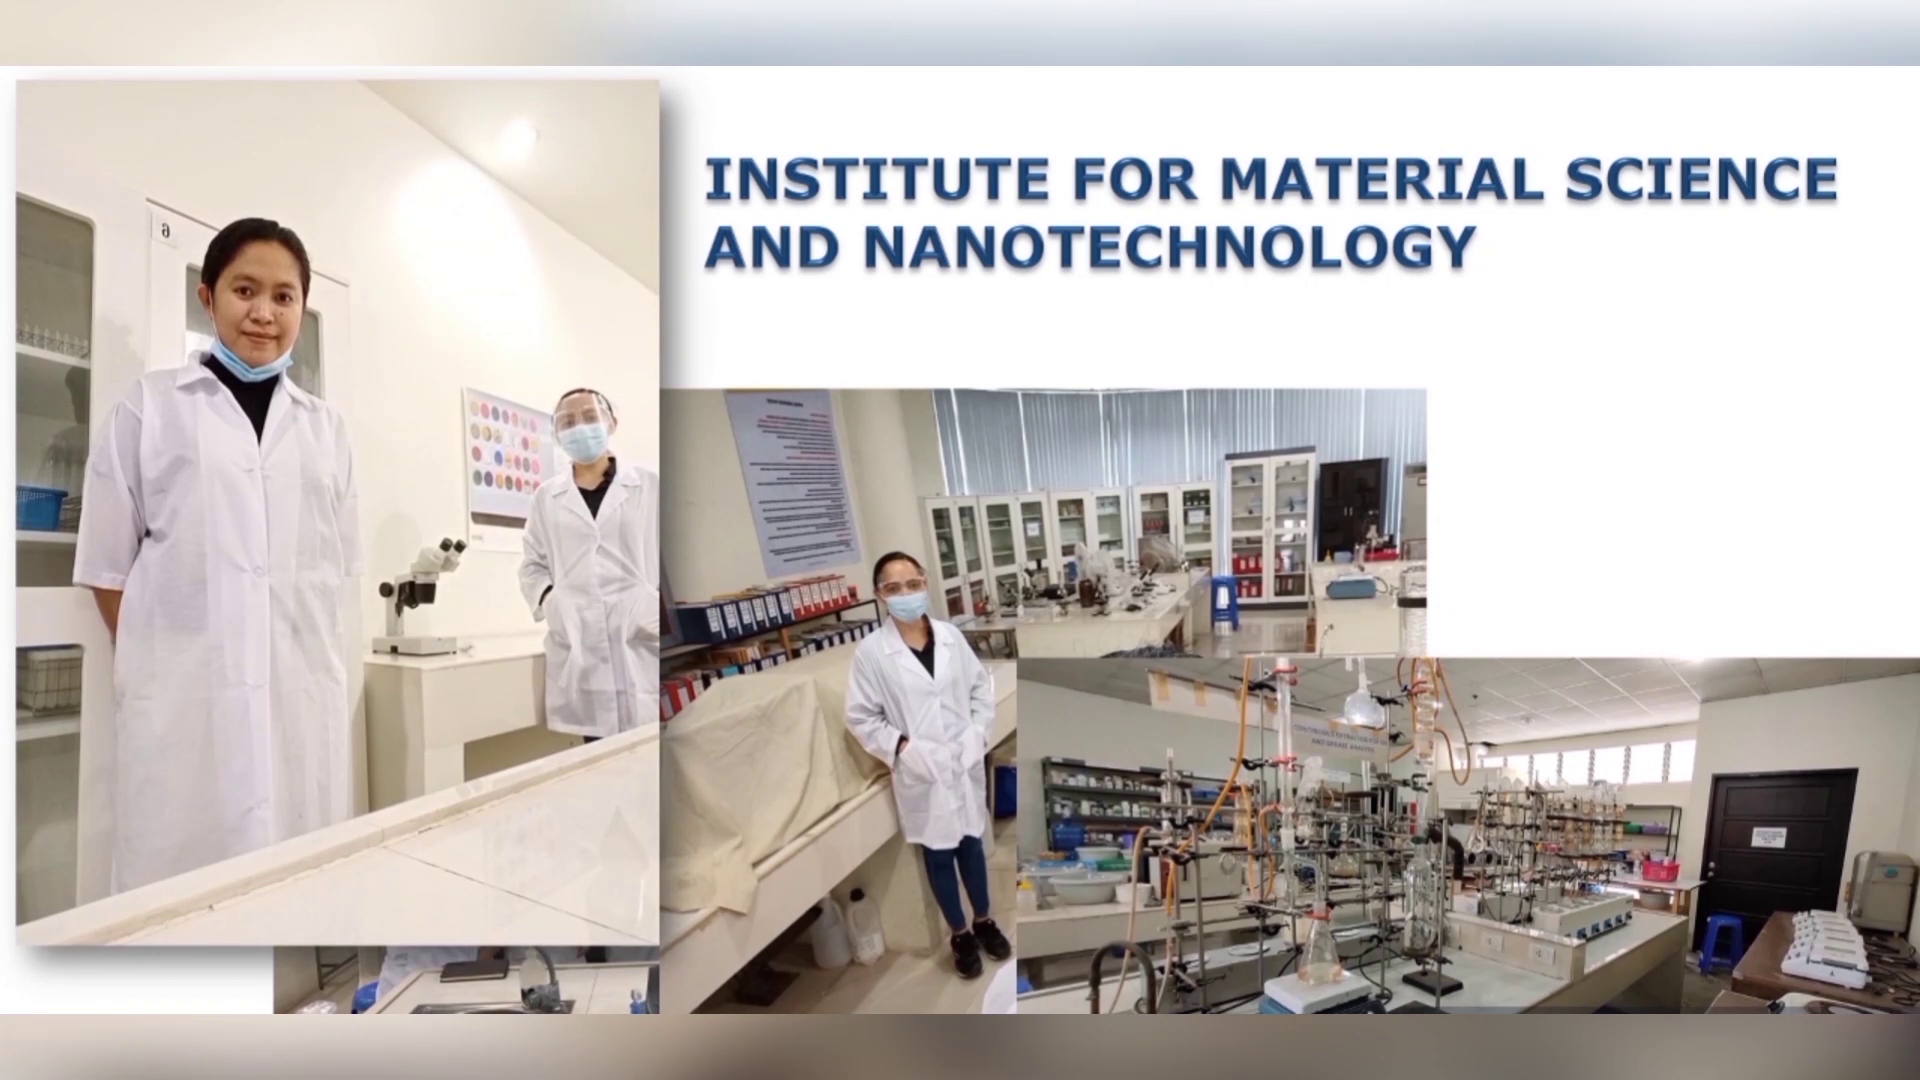 Institute for Material Science and Nanotechnology